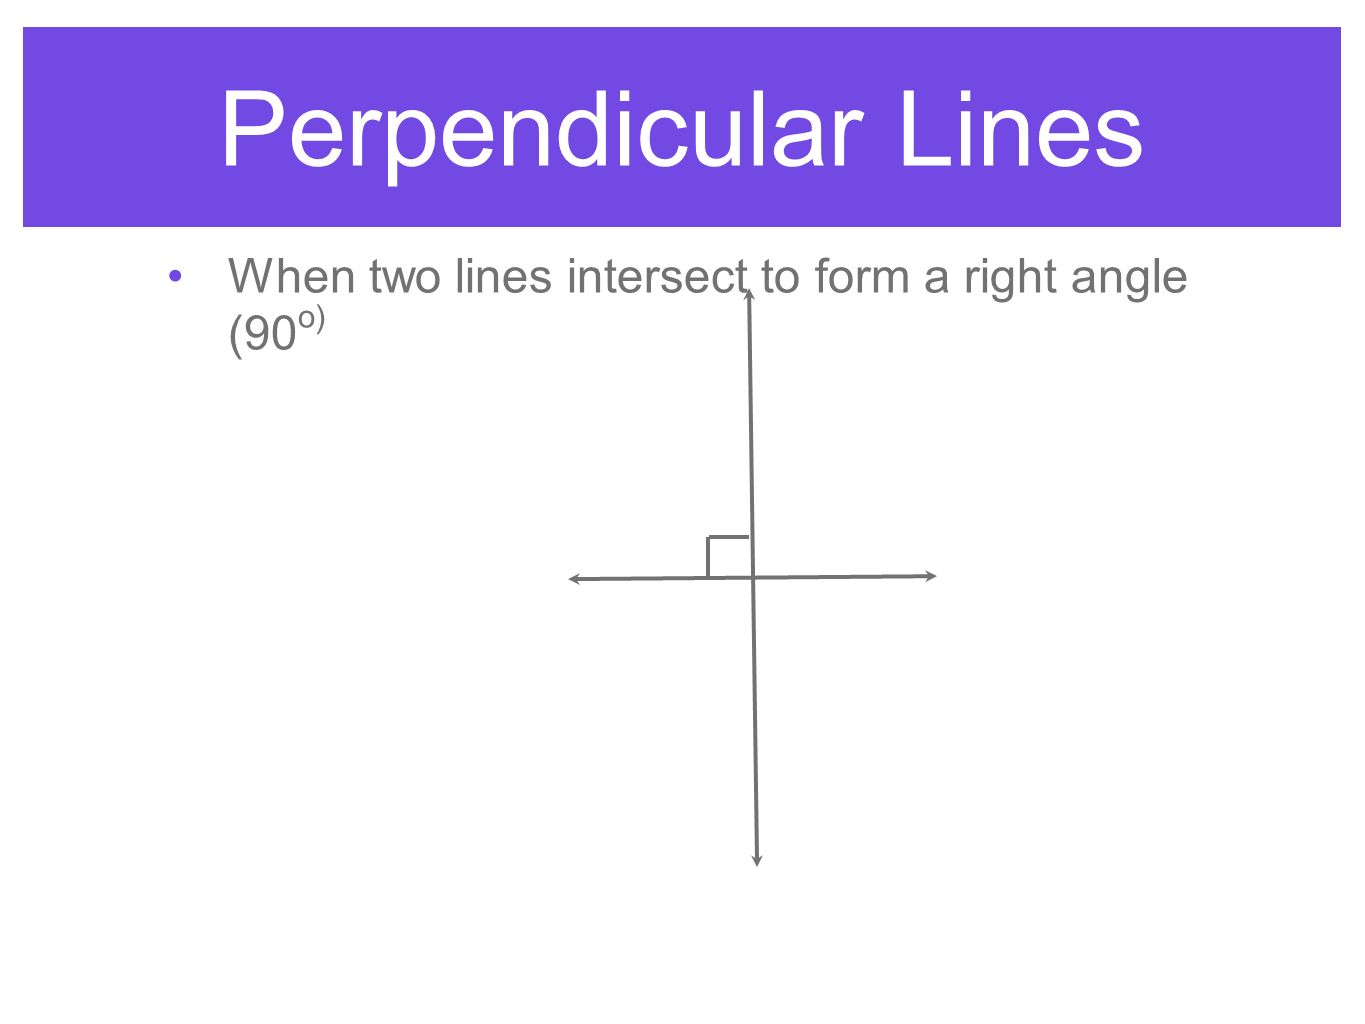 Perpendicular Lines When two lines intersect to form a right angle (90o)